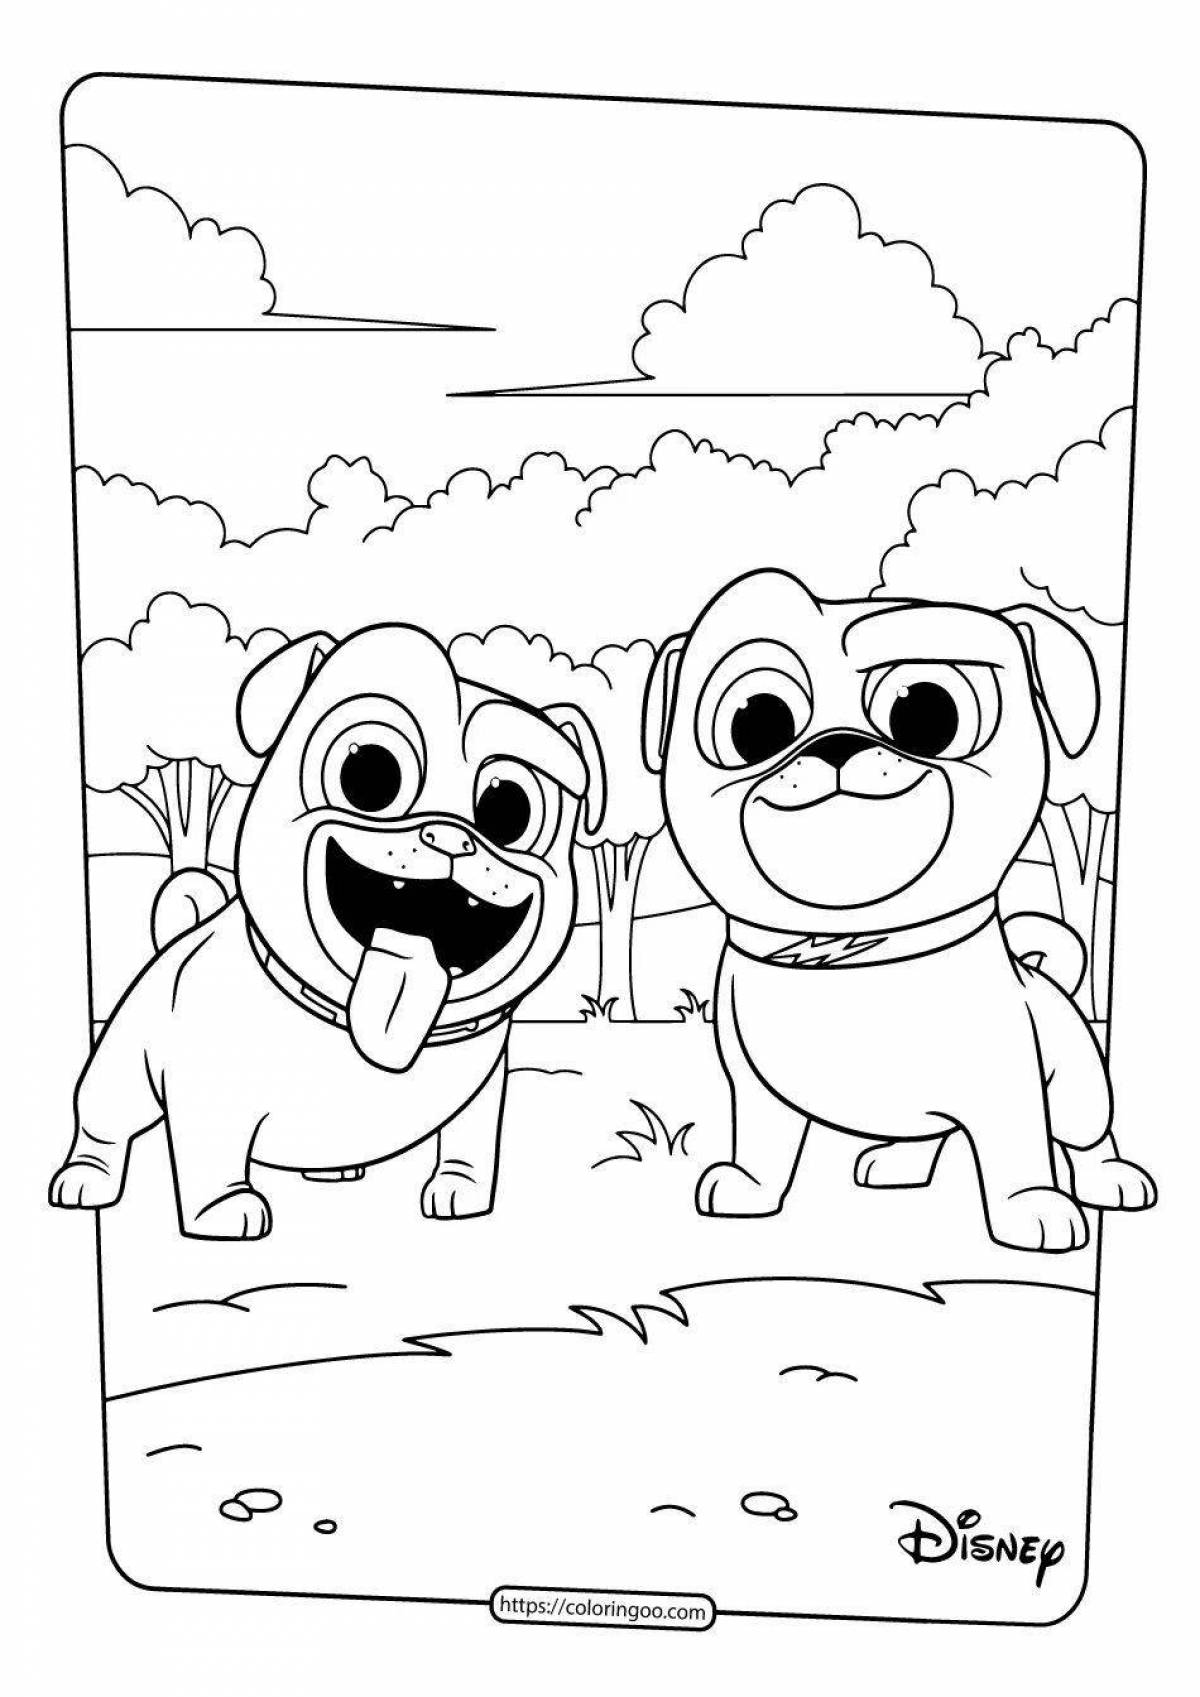 Coloring book exotic pug for the new year